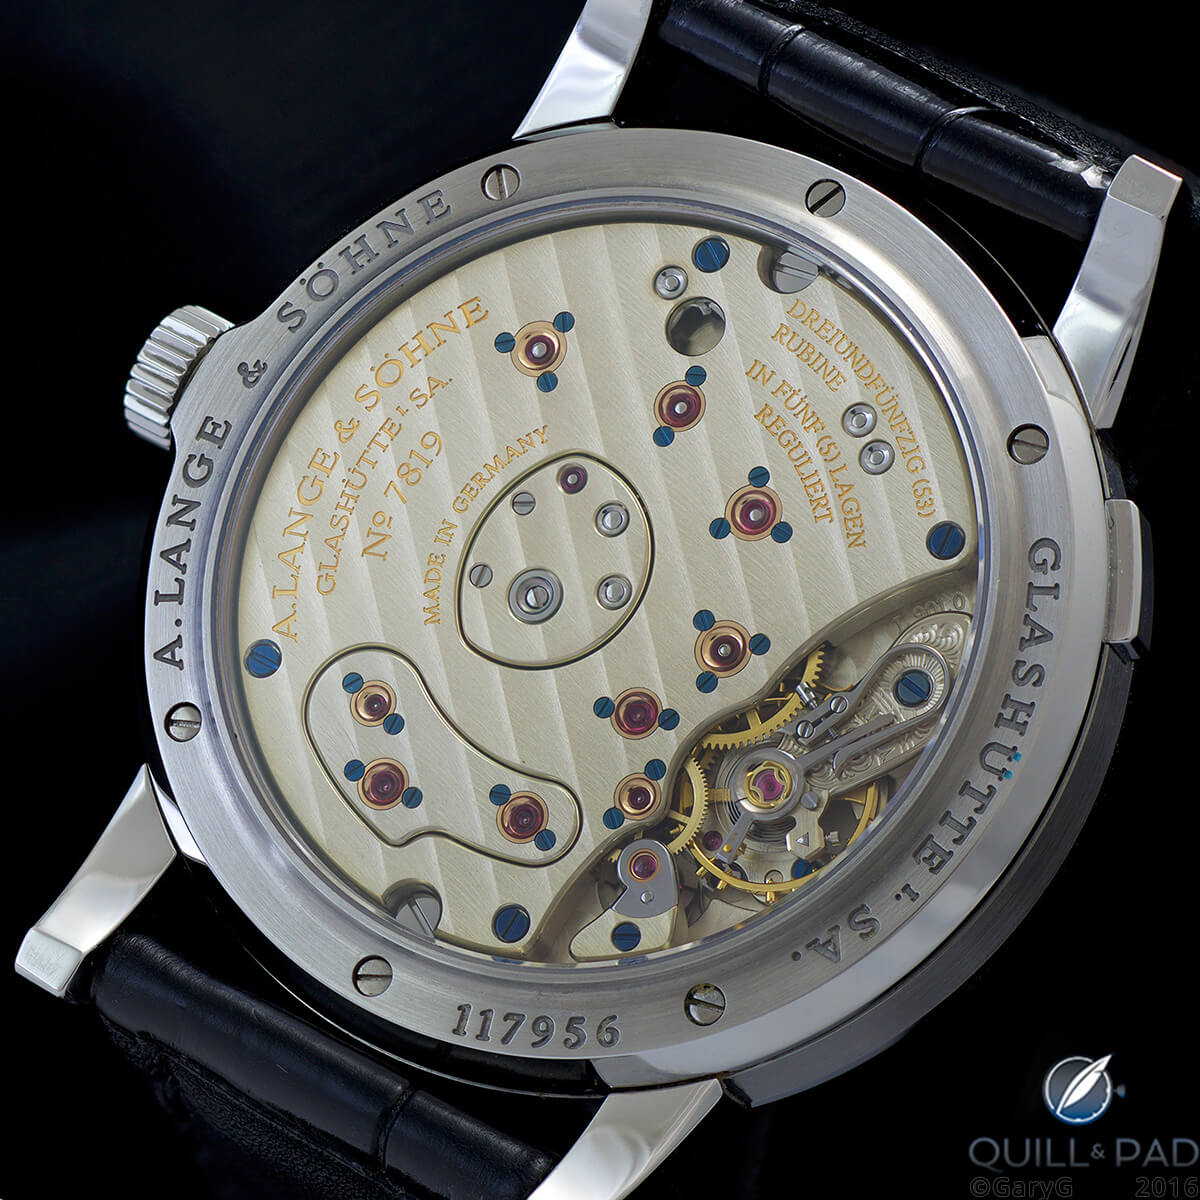 Historical contrast: stainless steel case and German silver movement comprise this rare A. Lange & Söhne Lange 1 in steel